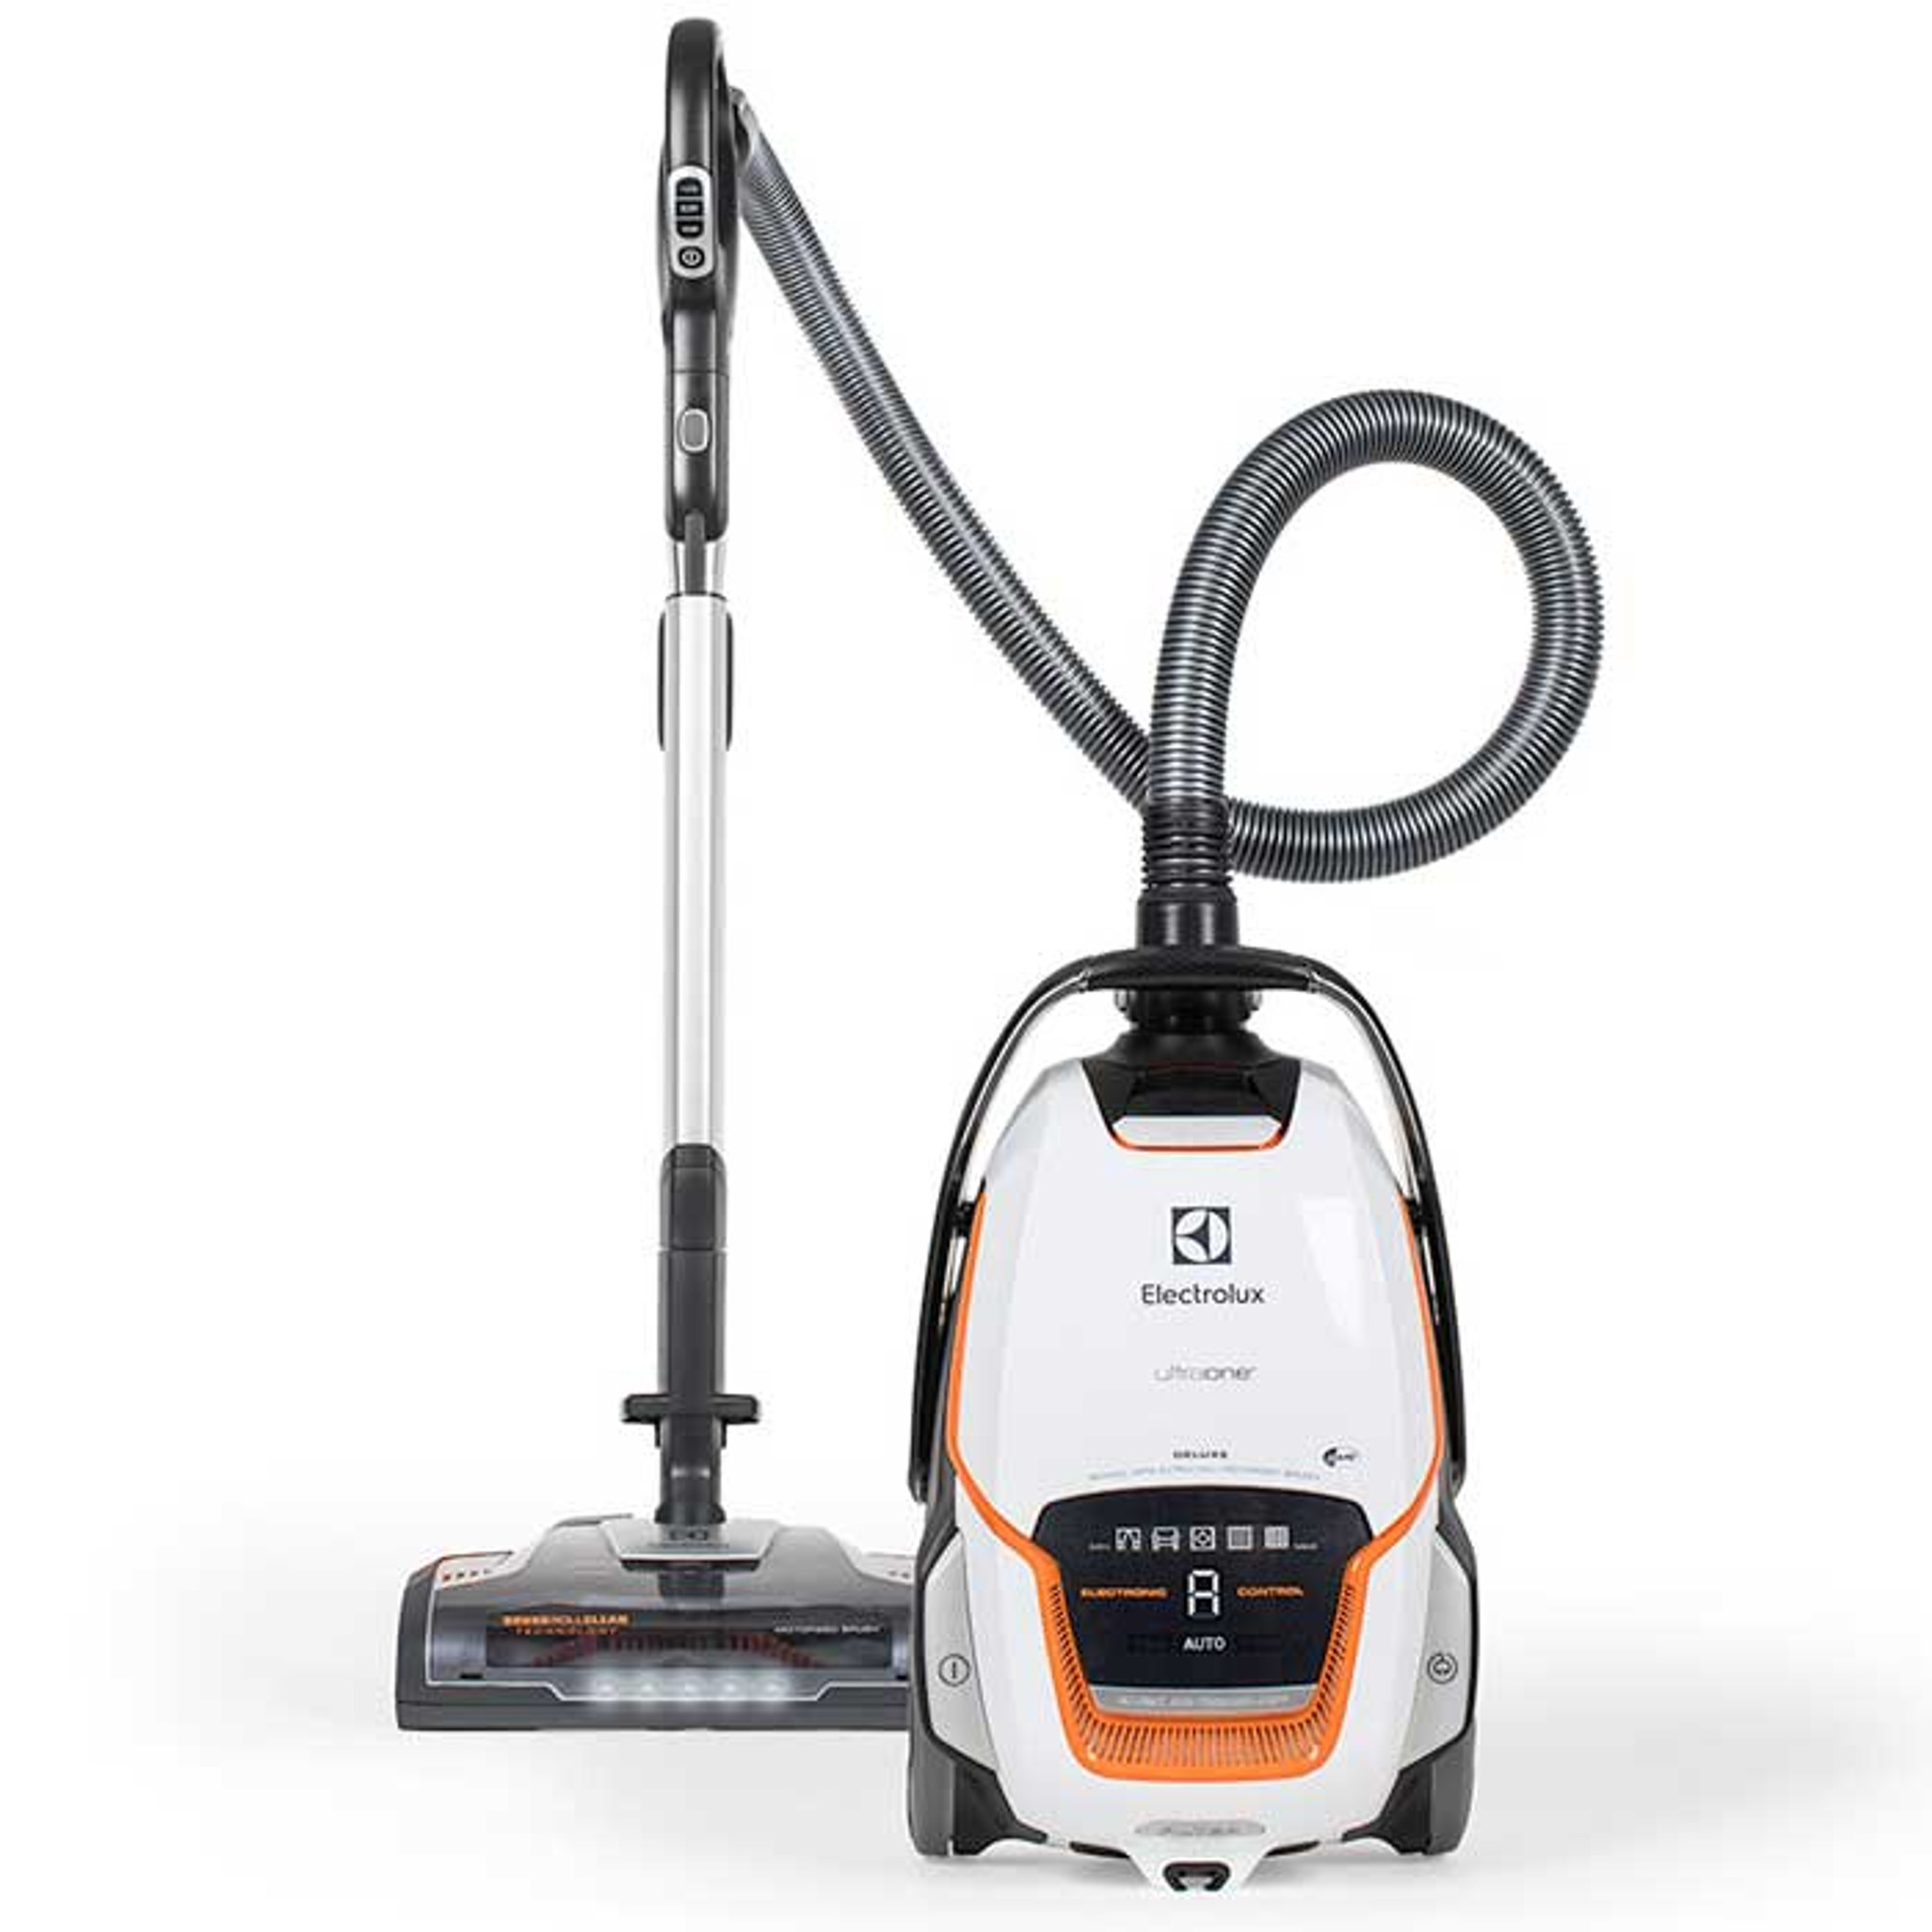 Buy Electrolux Ultra One Deluxe EL7085B Canister Vacuum Cleaner from Canada at